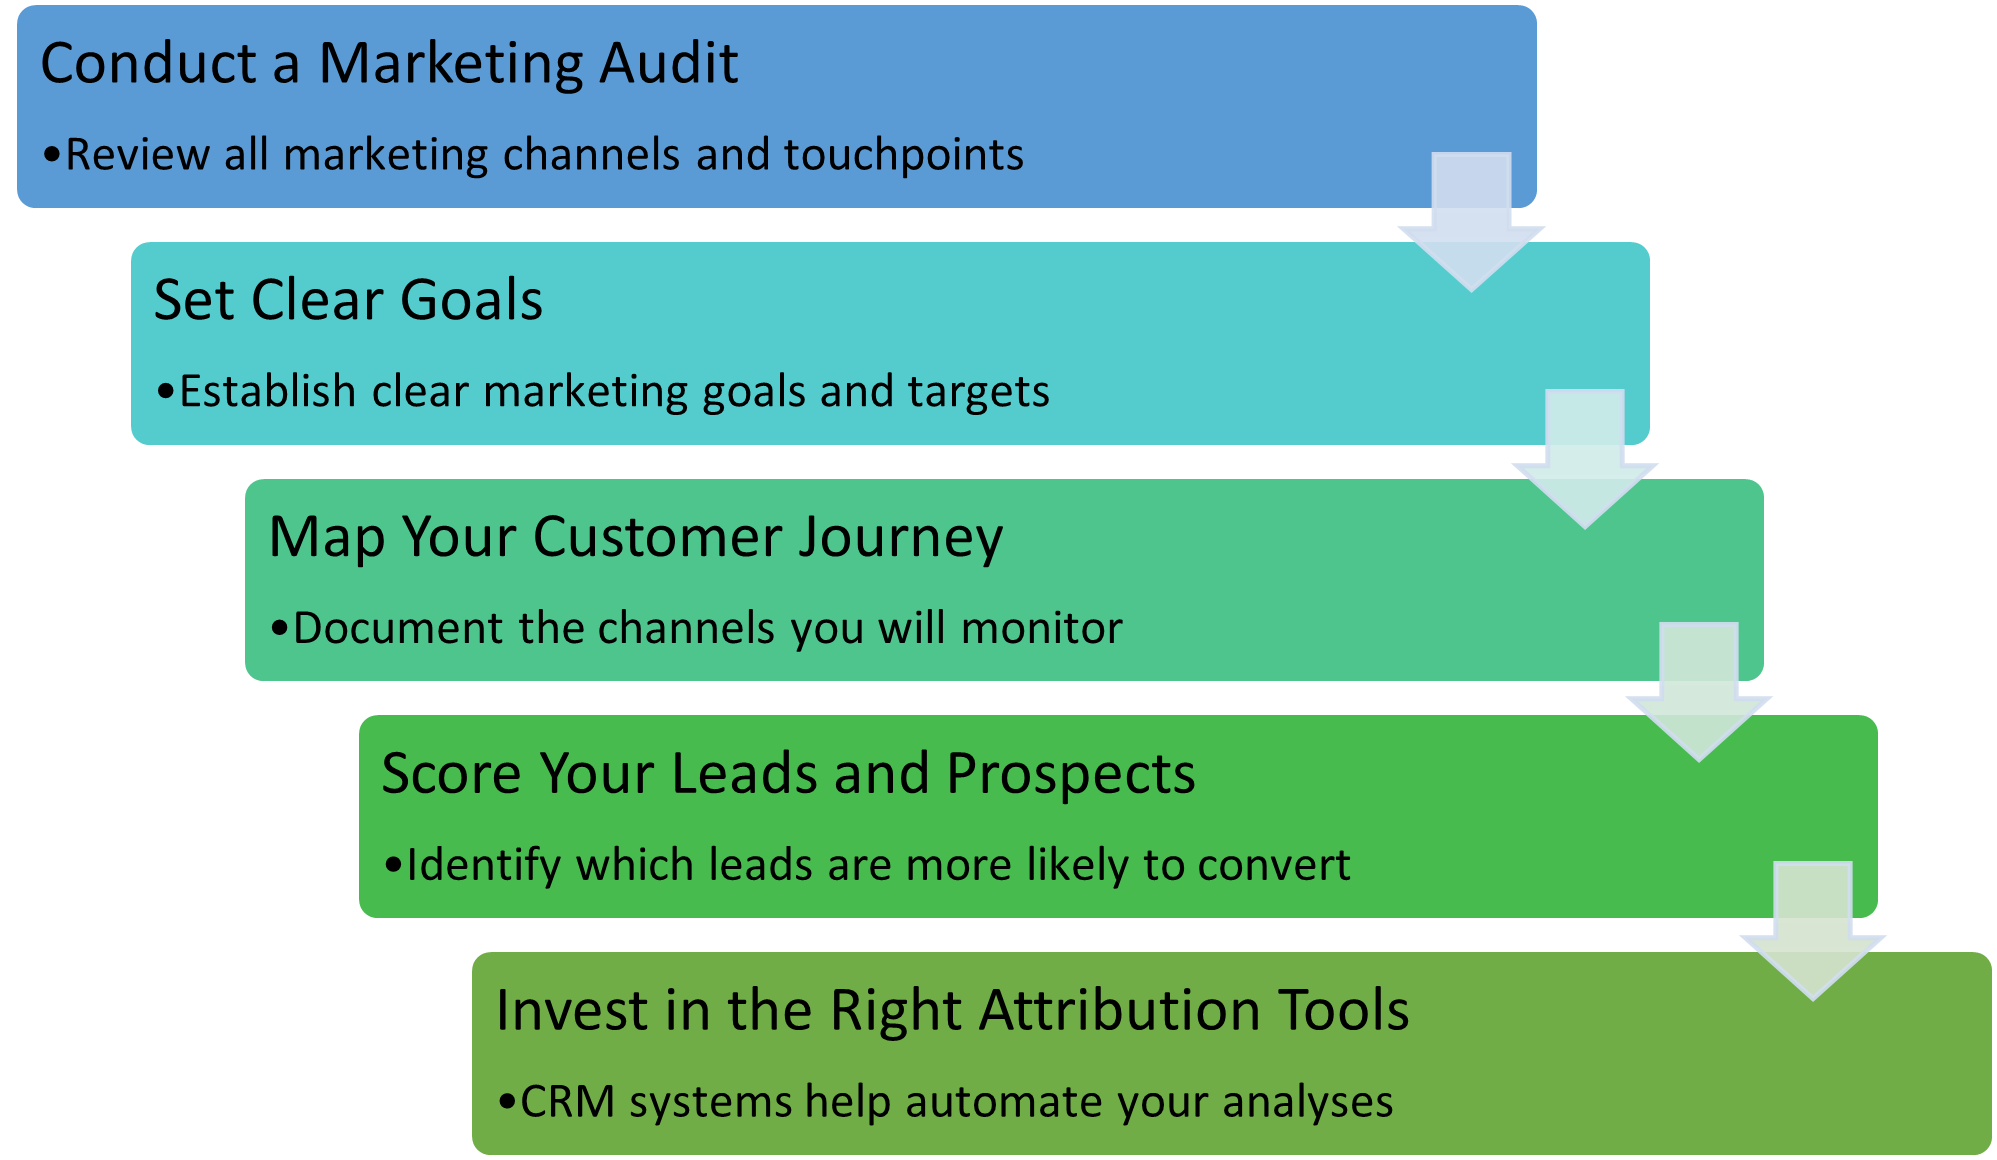 1. Conduct a marketing audit. 2. Set clear goals. 3. Map your customer journey. 4. Score your leads and prospects. 5. Invest in the right attribution tools.